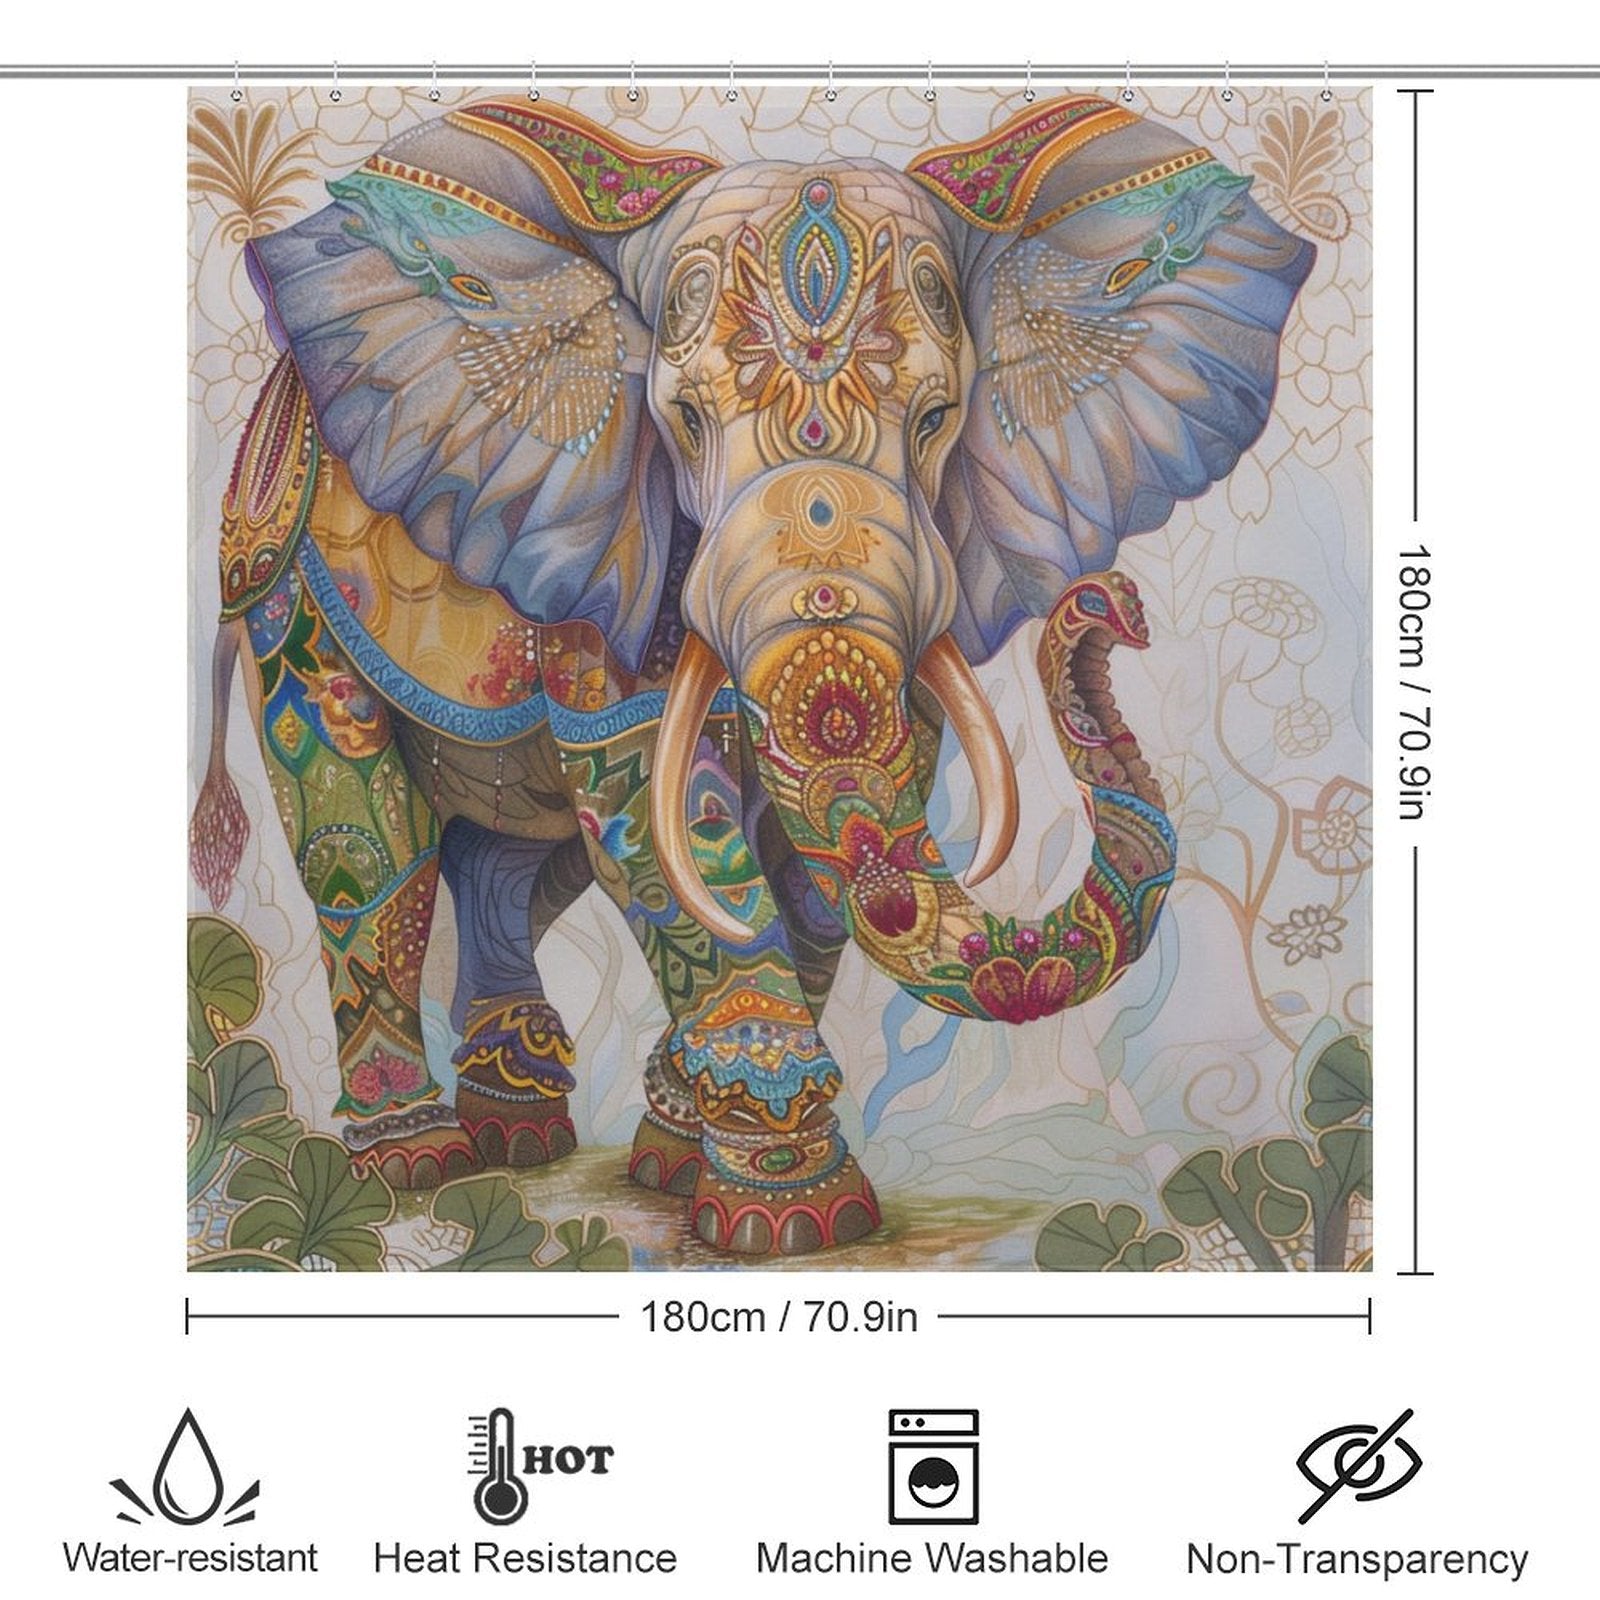 An Exquisite India Style Elephant Shower Curtain-Cottoncat from Cotton Cat featuring a colorful, intricately decorated elephant illustration. With dimensions of 180 cm x 180 cm, it boasts water-resistant, heat-resistant properties, is machine washable and non-transparent.